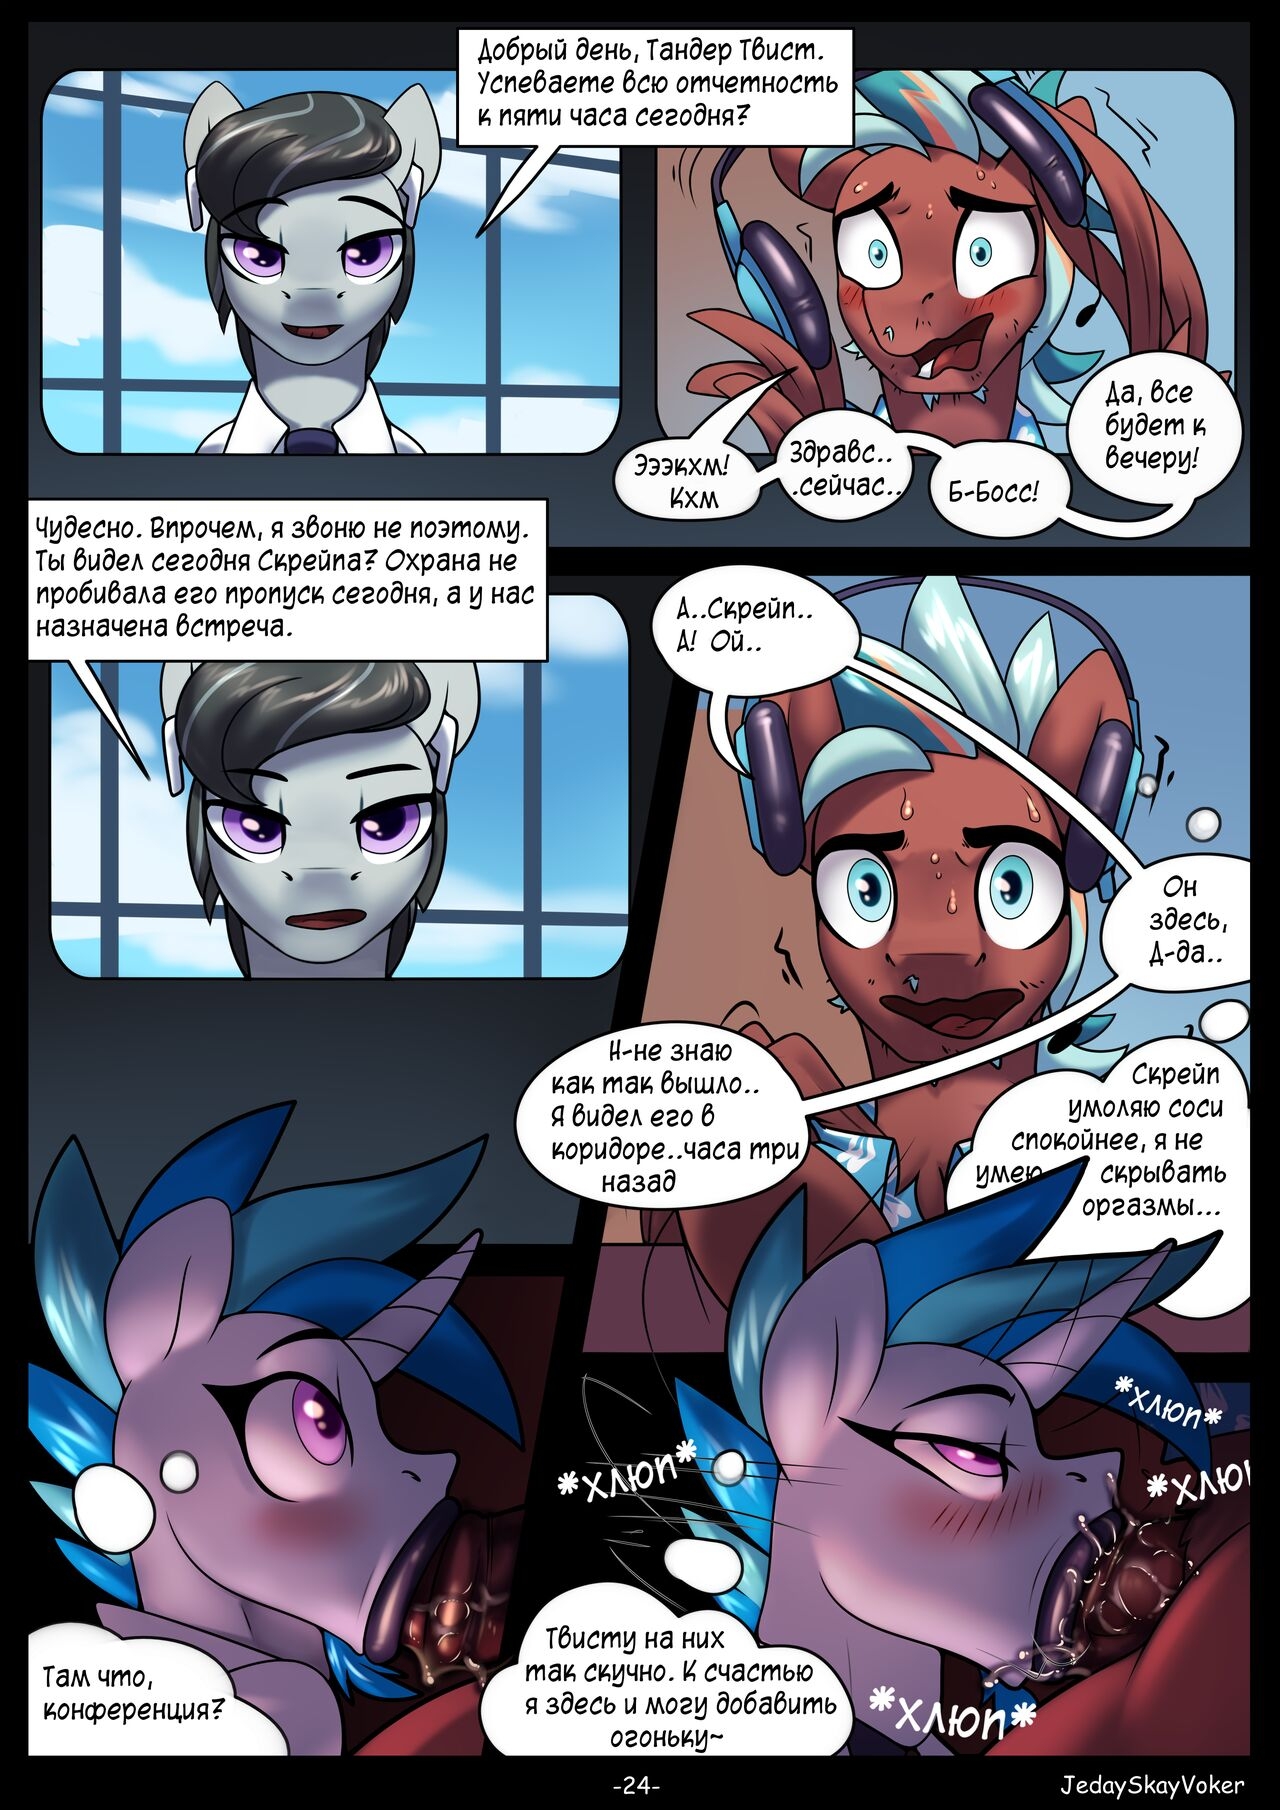 [JedaySkayVoker] Play the Record, ch. 1-3 (My Little Pony: Friendship is Magic) [+Sketches][Ongoing][Russian] 24